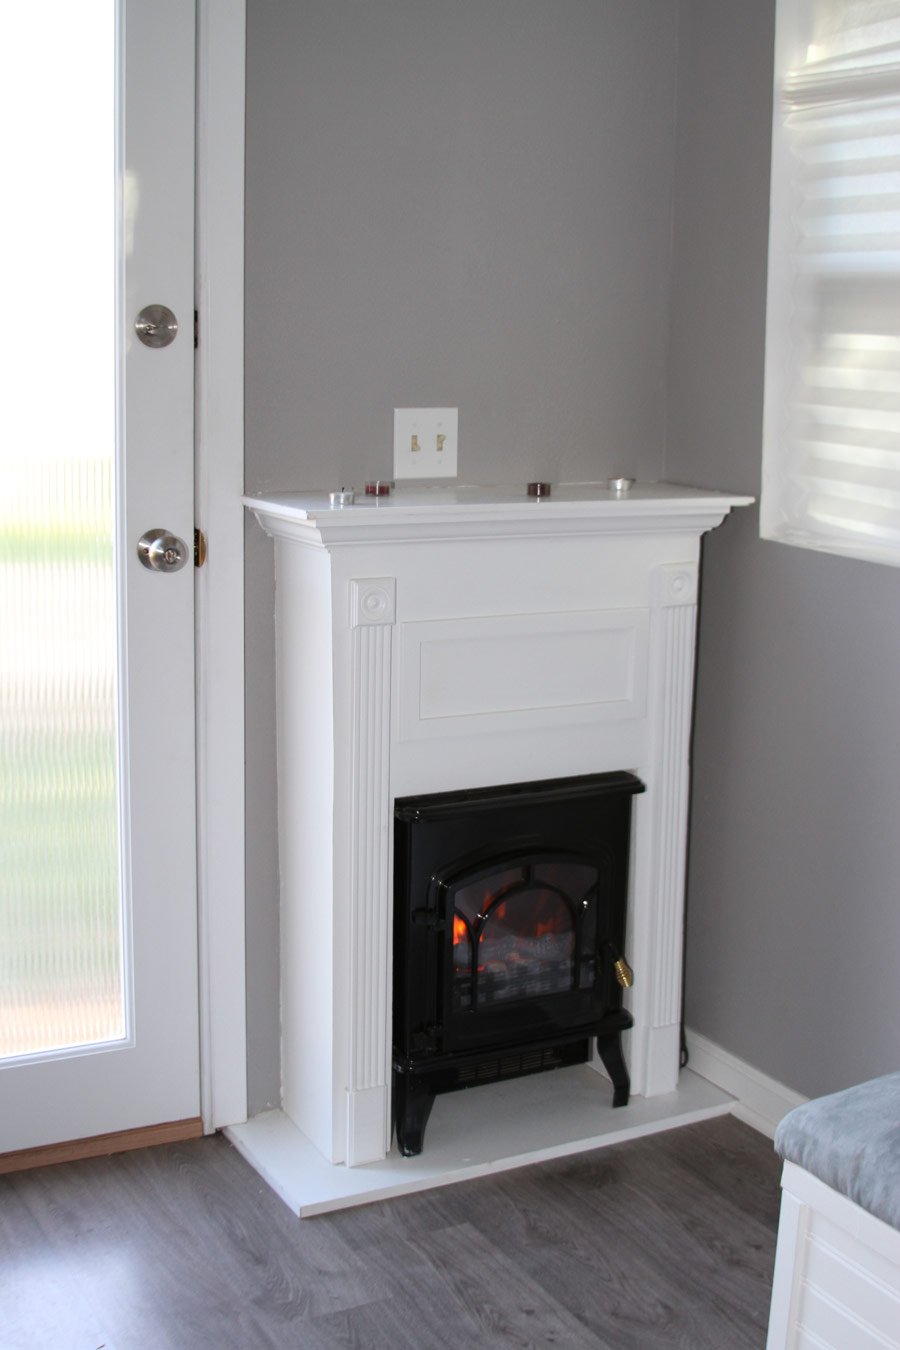 National Fireplace Institute New Pin by Linda Wallace On Decorating Country Cottage In